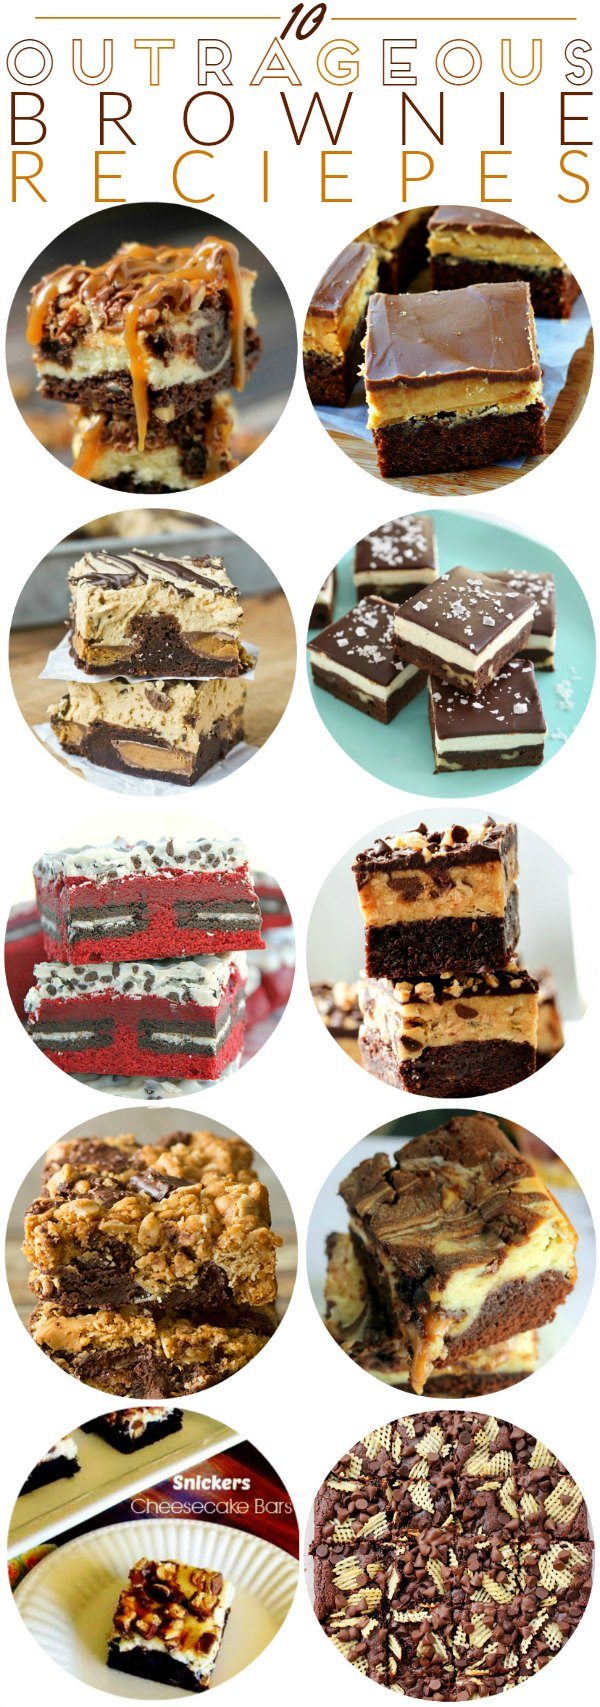 10 Outrageous Brownie Recipes roundup